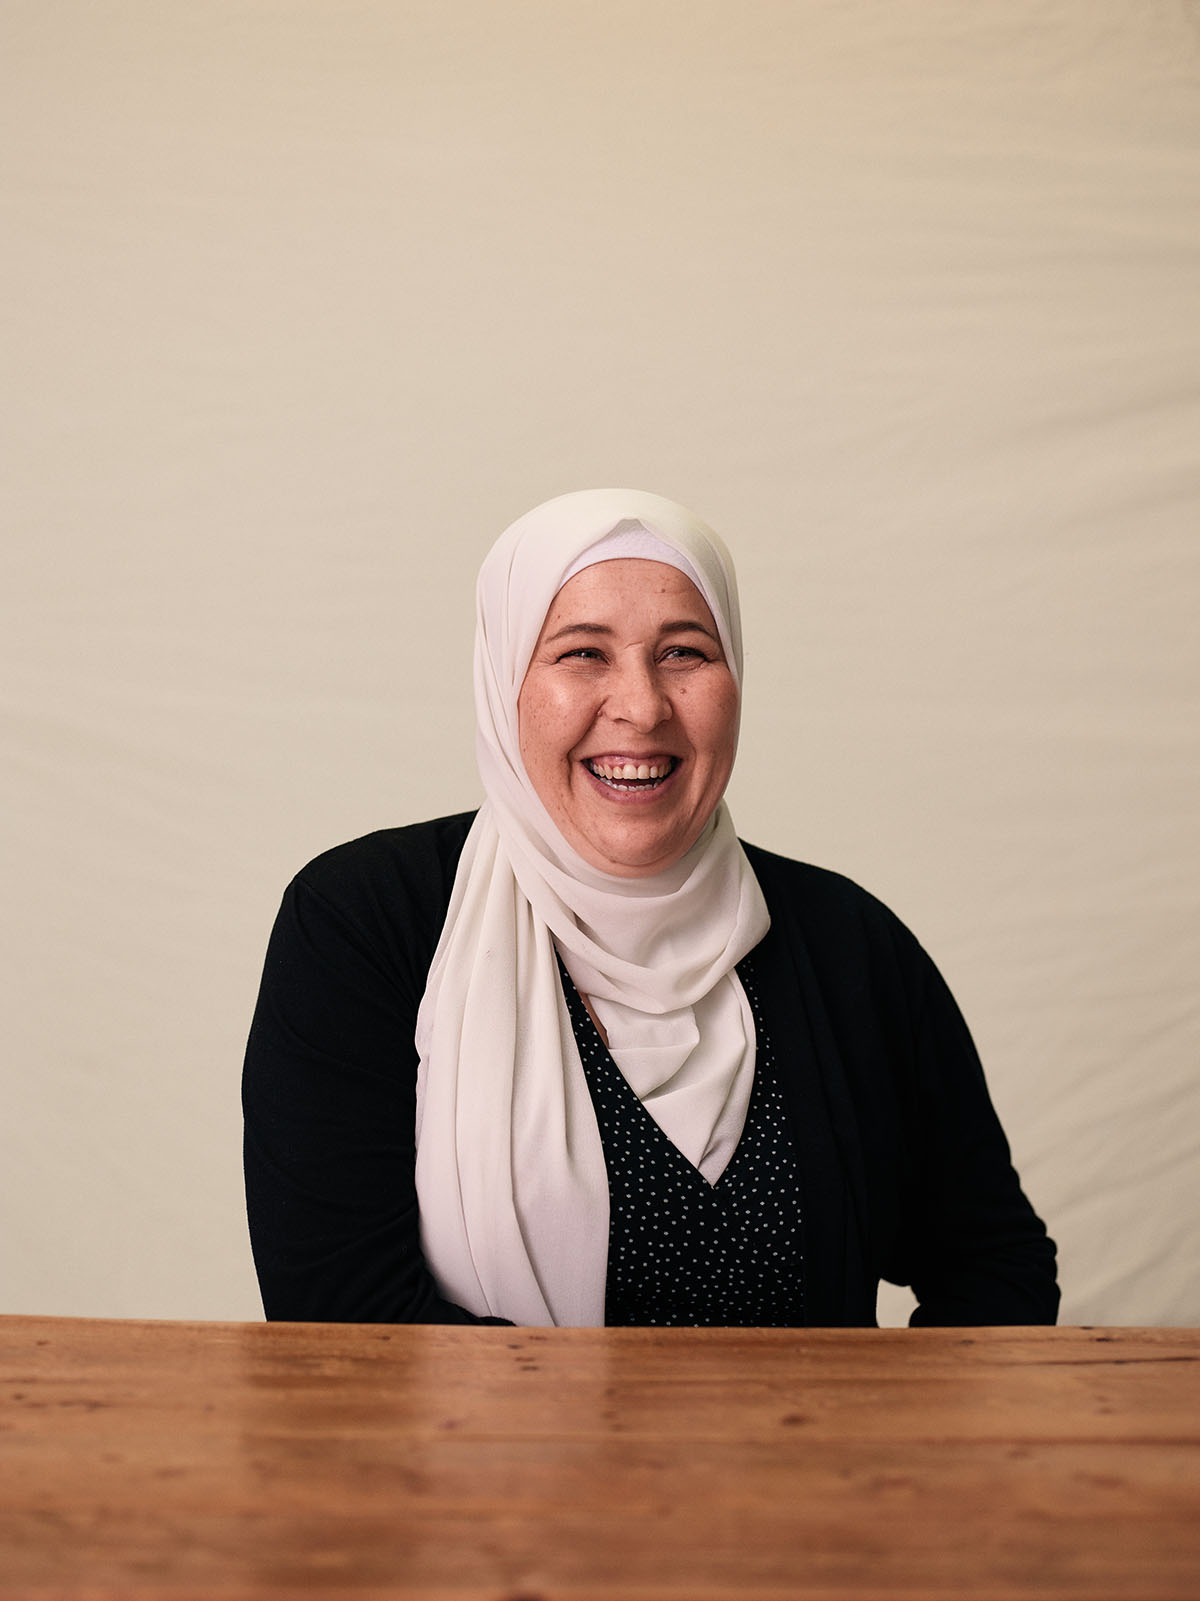 A woman in a white hijab and black shirt smiles in front of a plain background